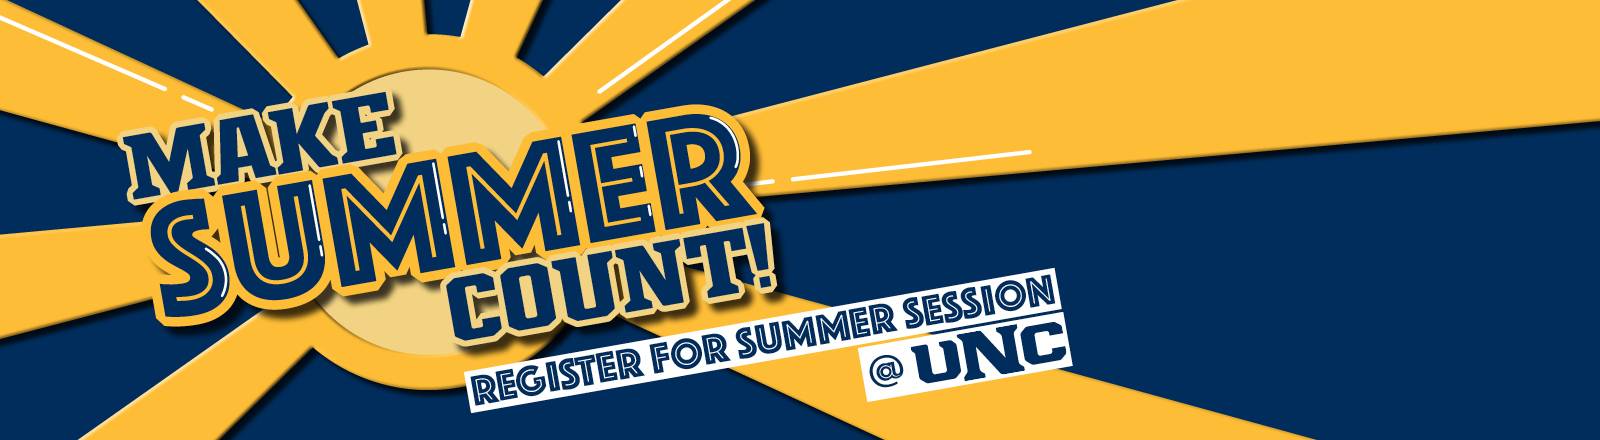 Summer Session at UNC